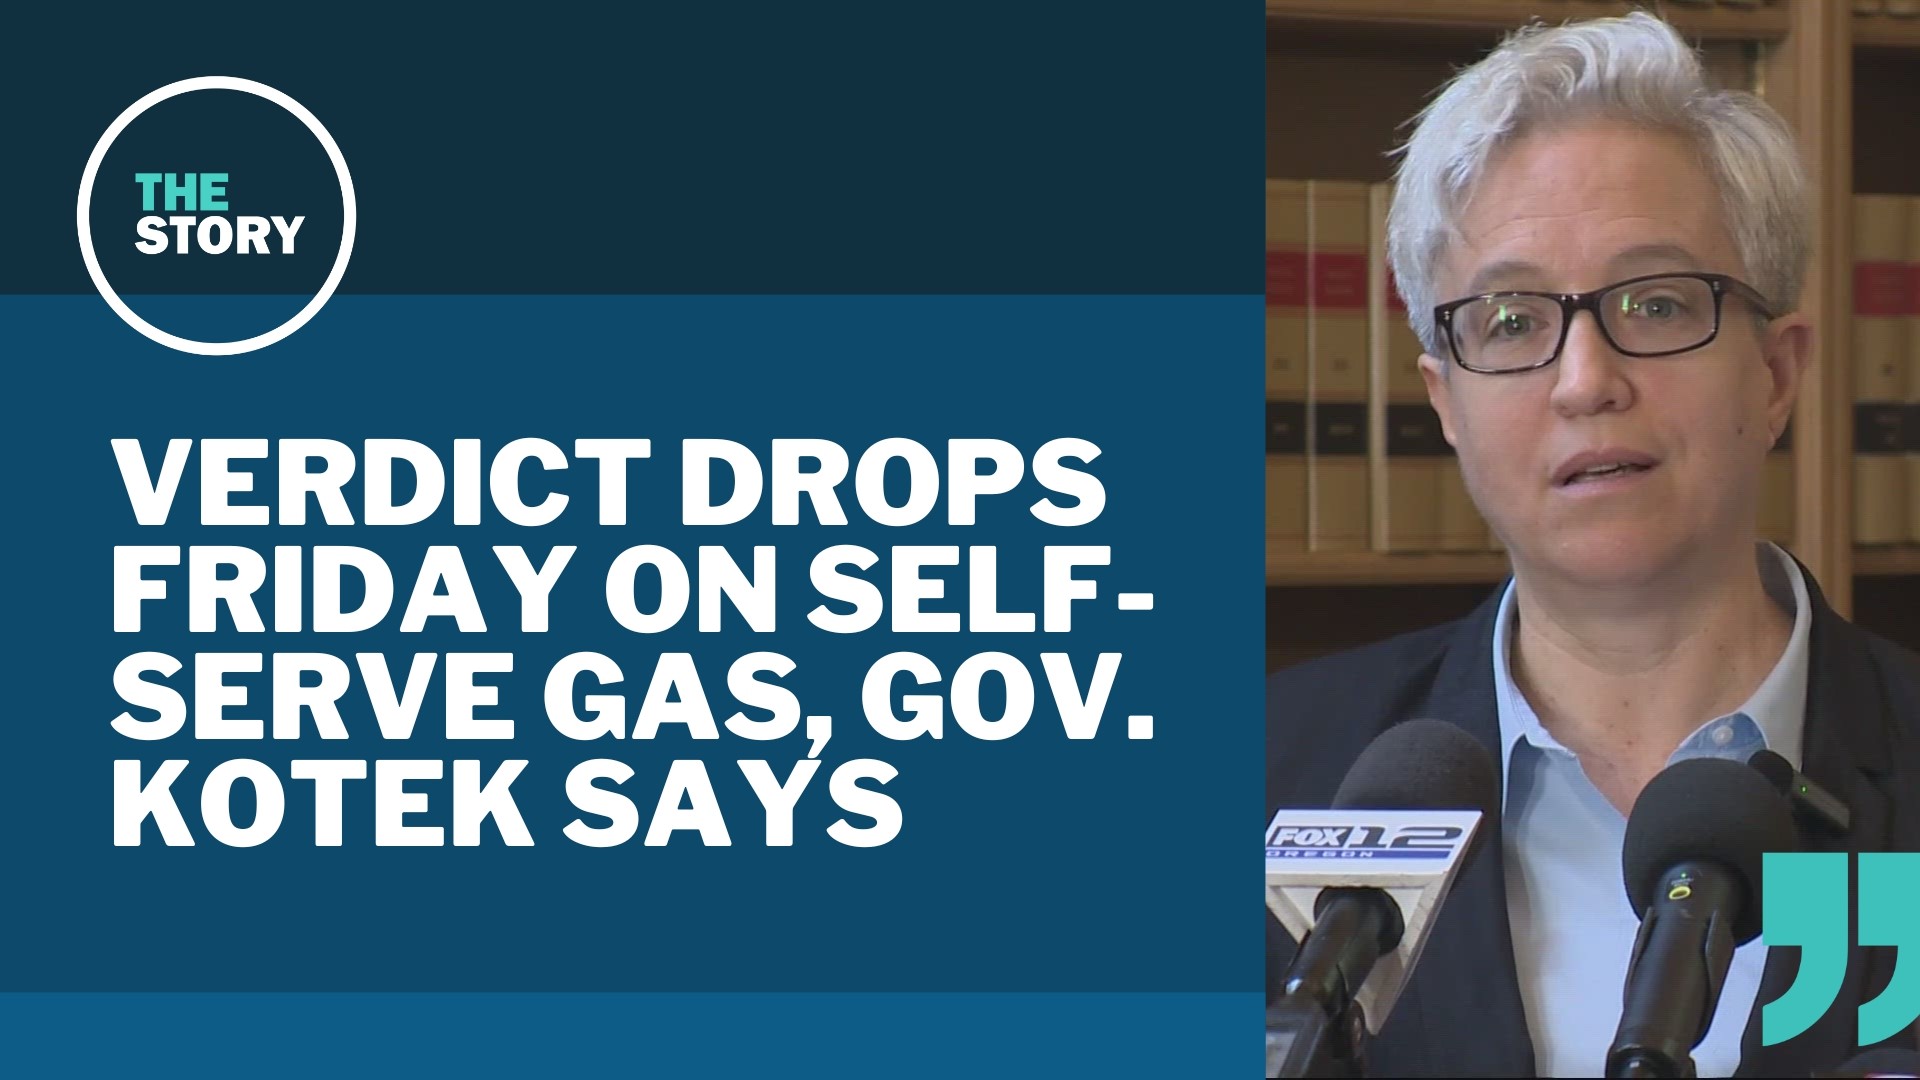 In a press conference, the Oregon governor said she has to give notice on any bill vetoes by Friday, which will signal her decision on self-service gas pumps.